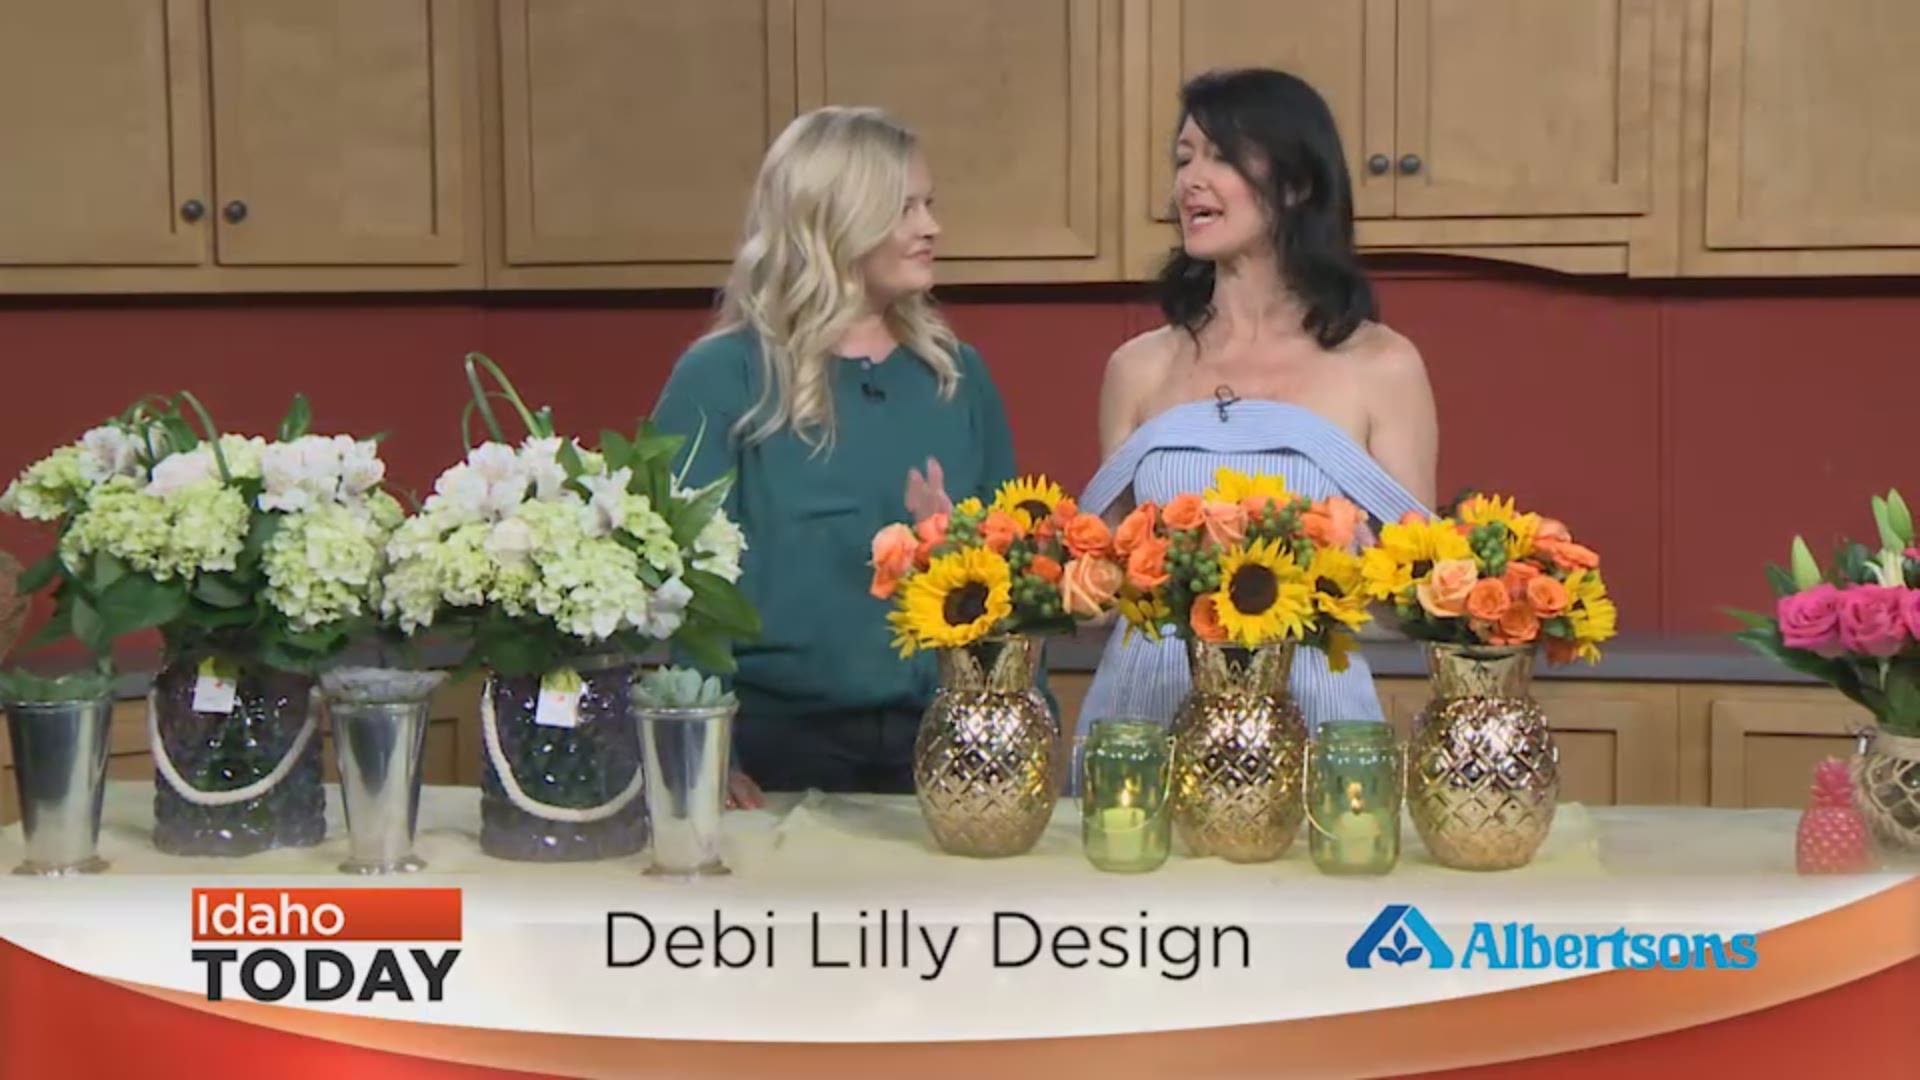 It's summer and that means summer flowers! Debi Lilly with Debi Lilly Design shares her favorite tips and tricks.